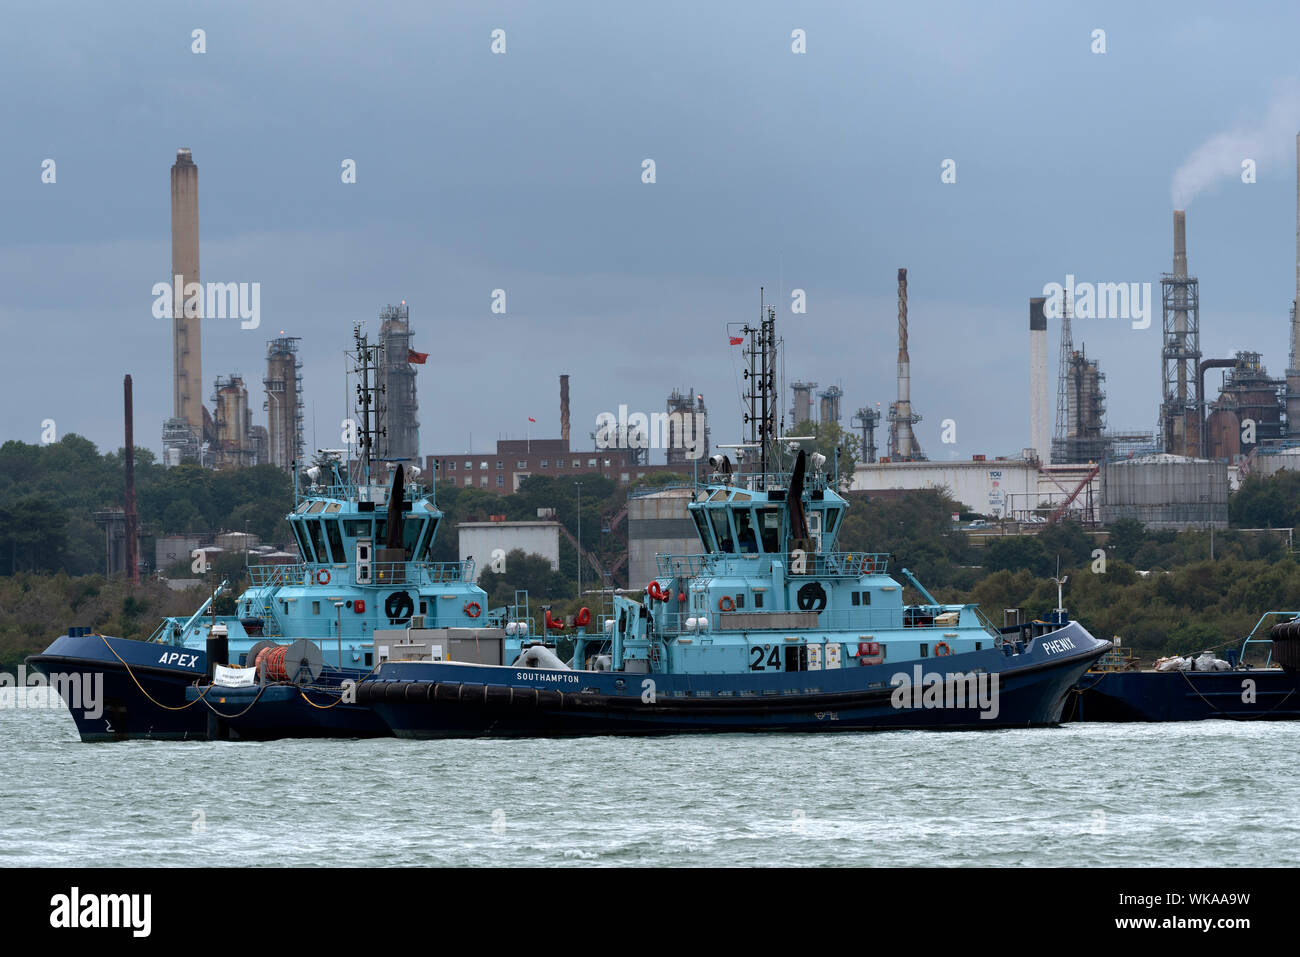 Fawley Marine, Southampton Water, England, UK. Apex and Phenix two Voith tractor tugs powered by Rolls Royce engines, alongside Fawley Marine refinery Stock Photo